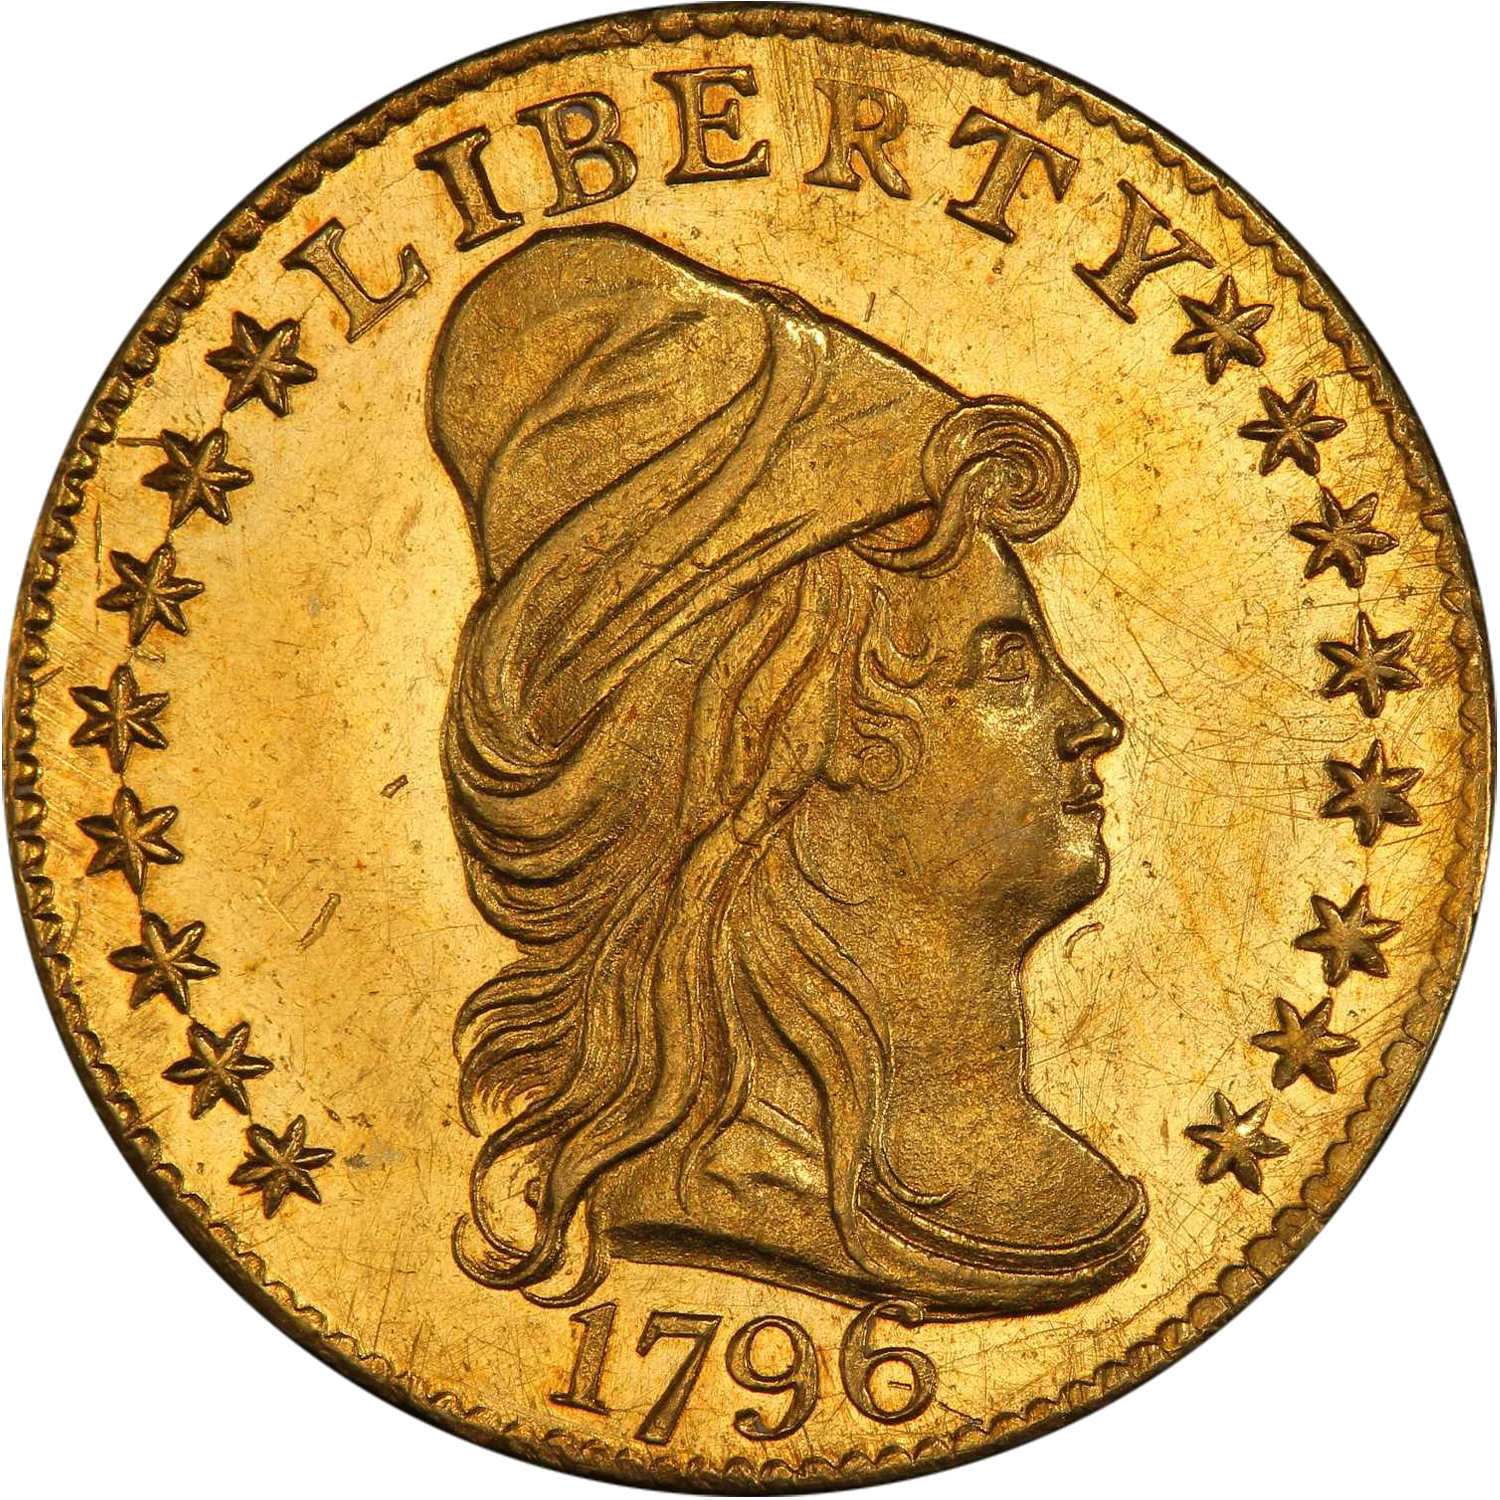 1796 gold quarter eagle with stars auction guide